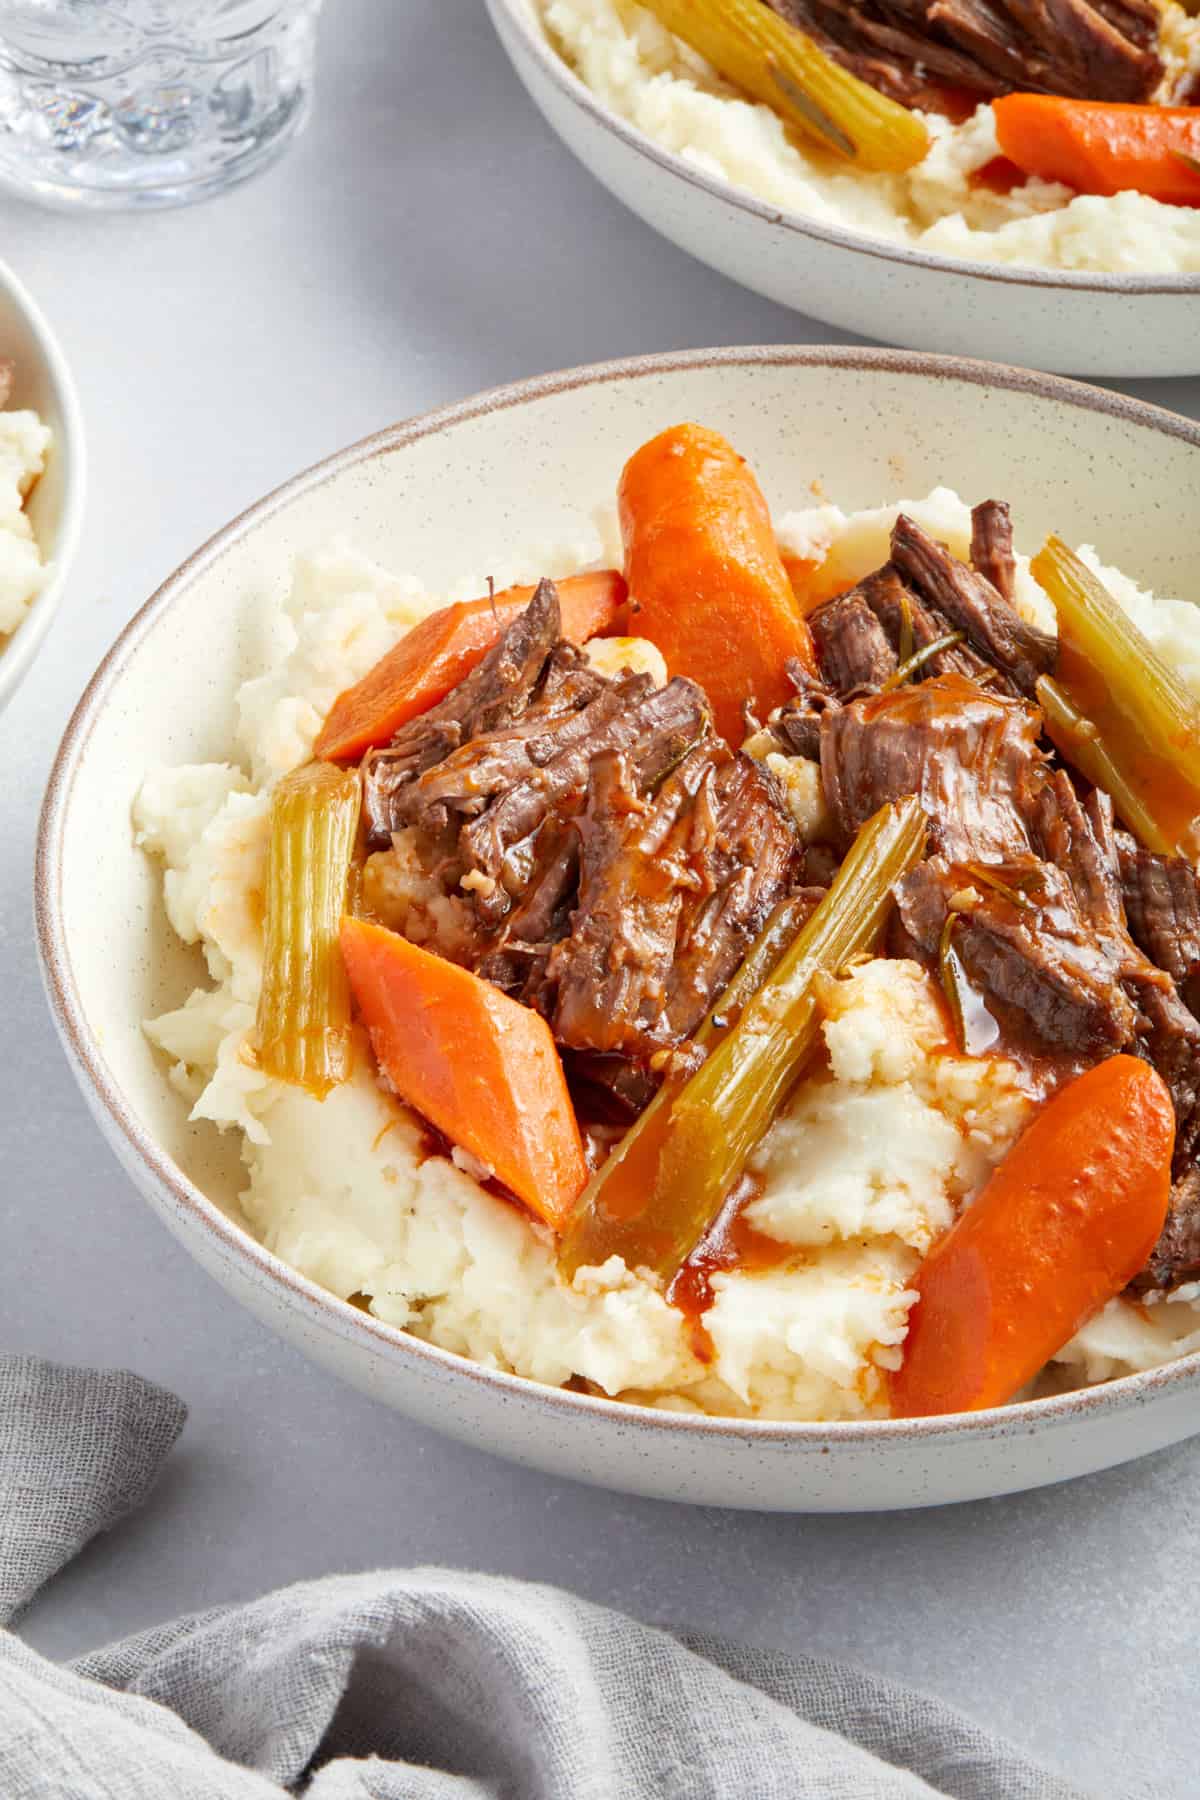 Close up view of a plate of mashed potatoes with dutch oven pot roast on top.